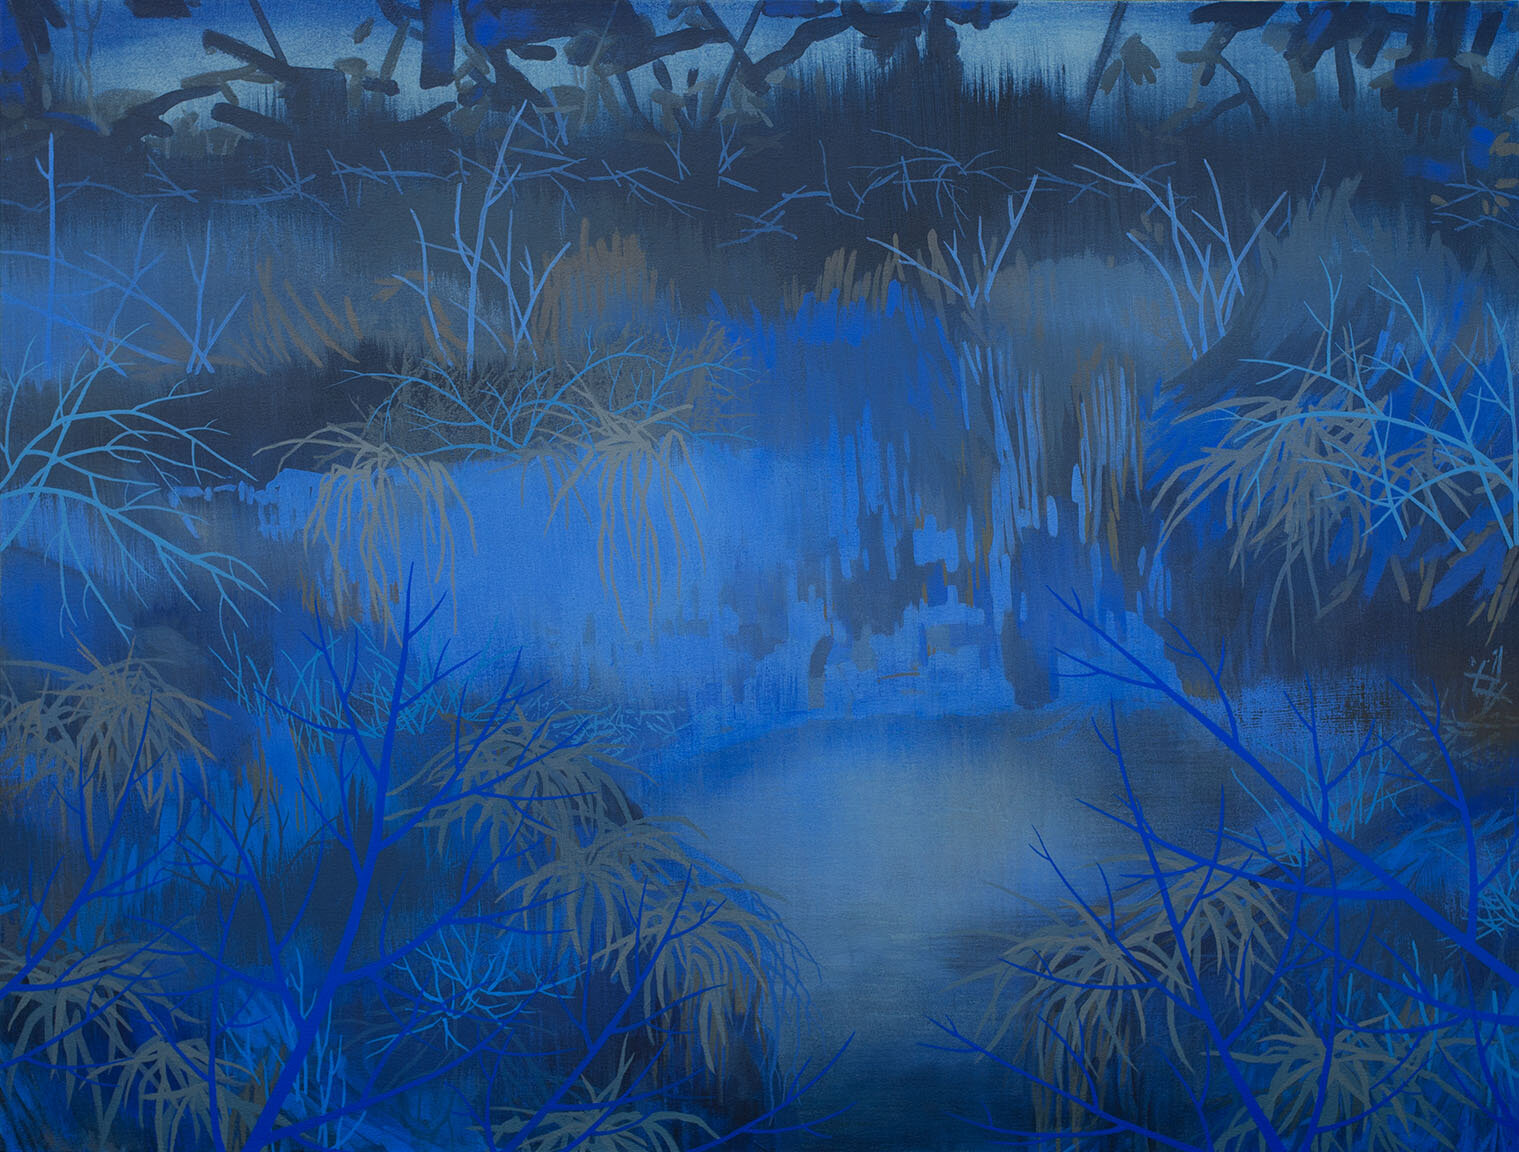   Blue Thicket  Acrylic on canvas 36 x 48 x 1.5” 